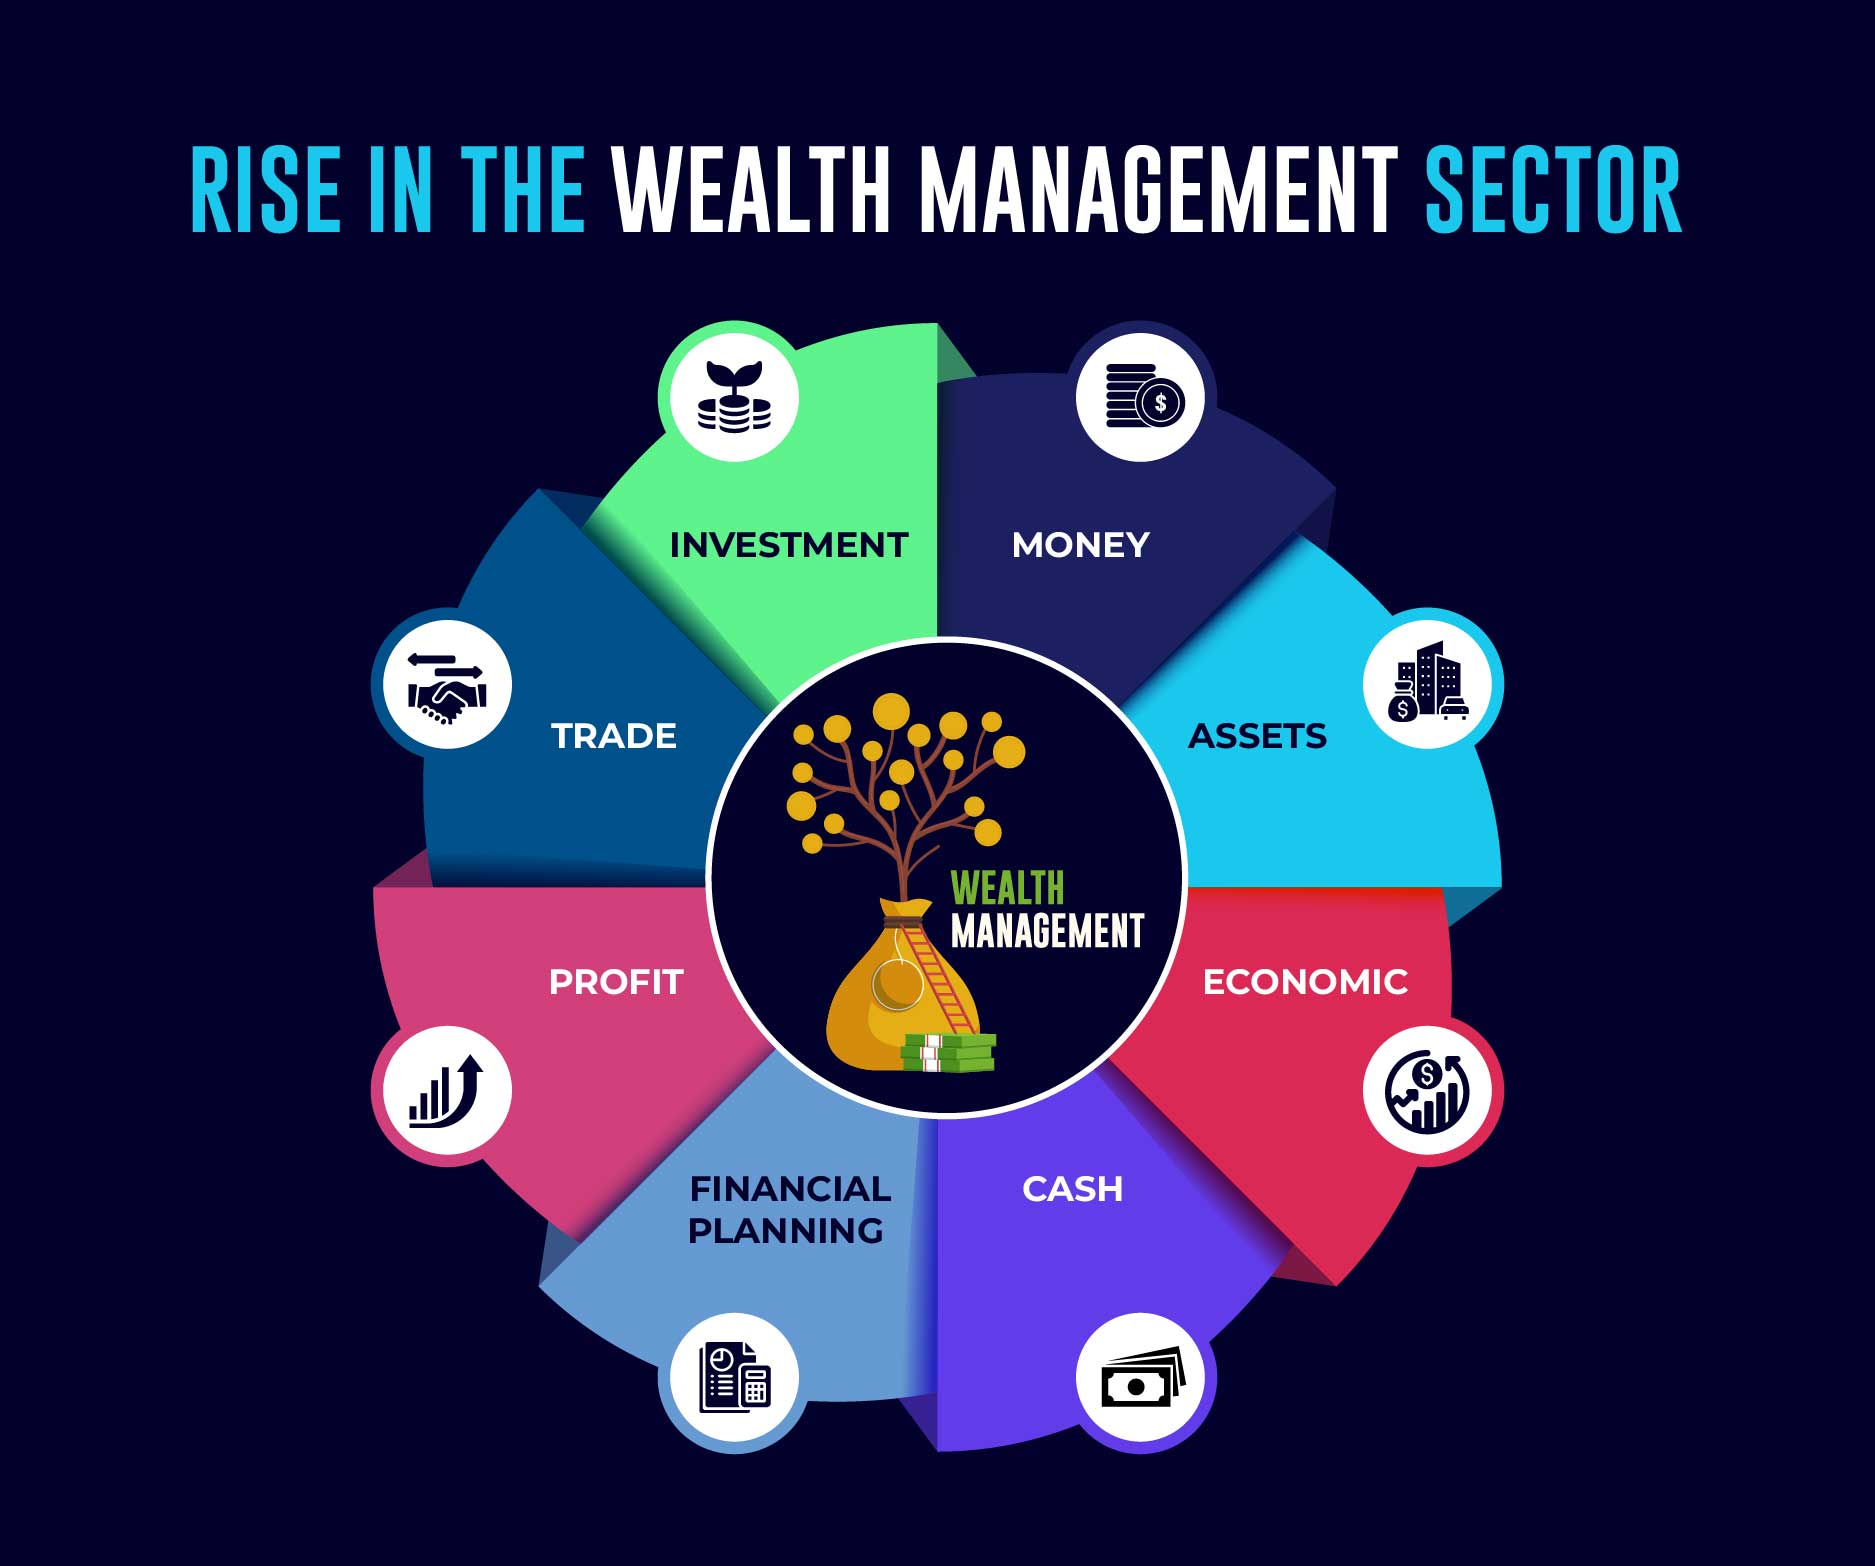 Rise in the Wealth Management Sector